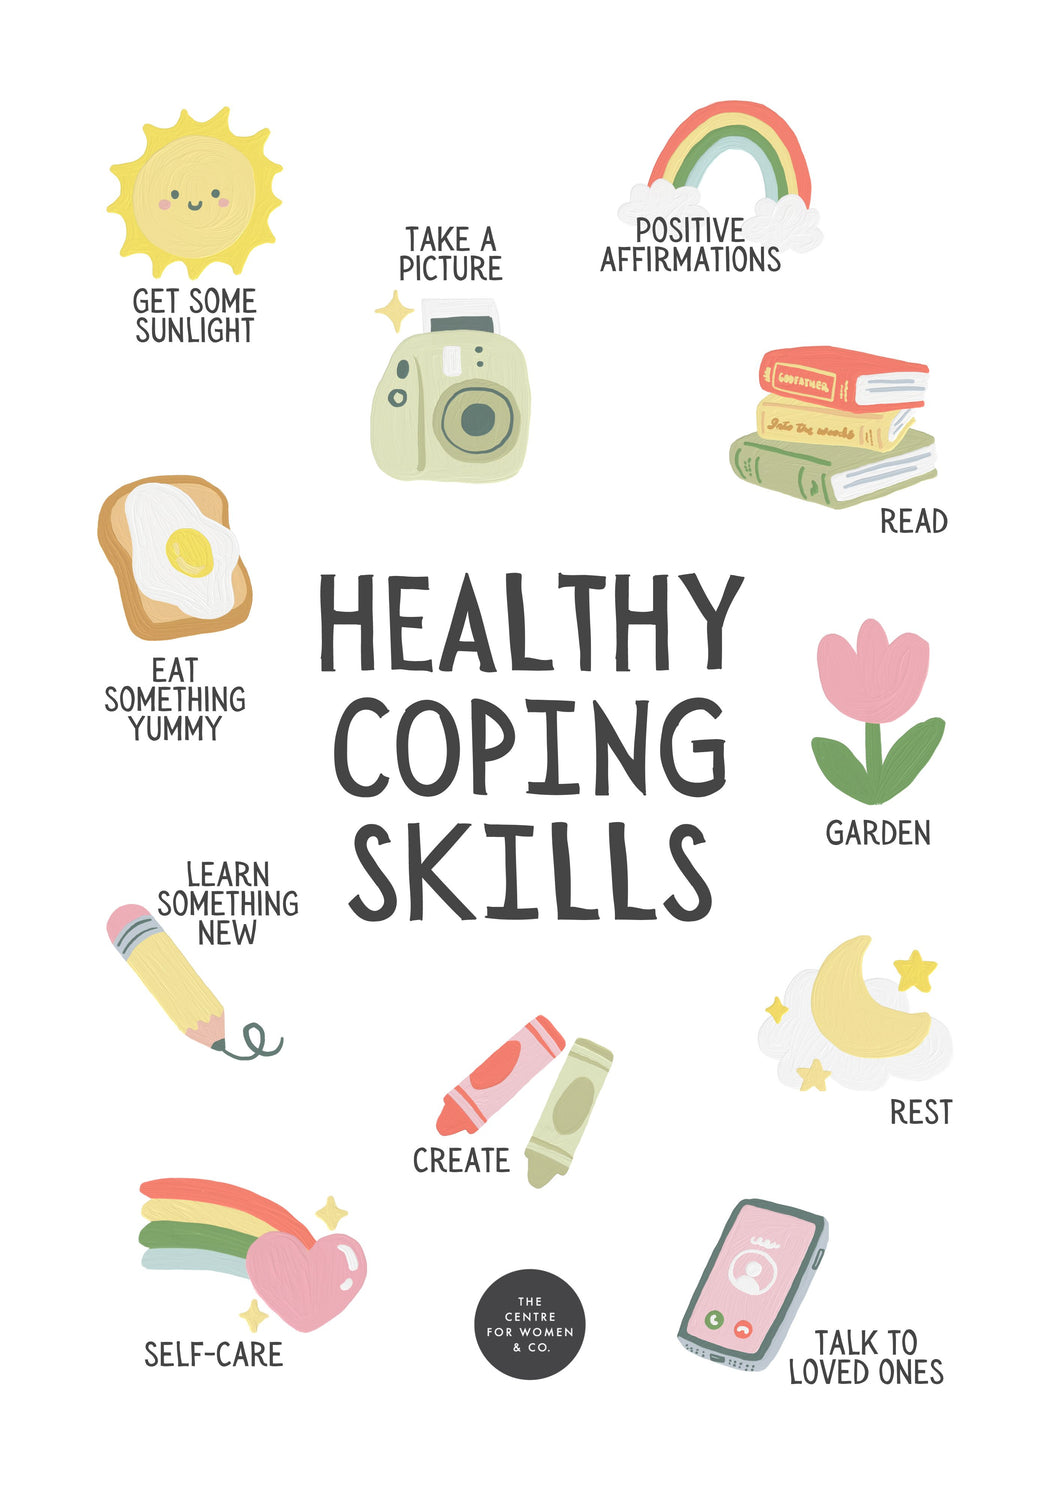 Healthy Coping Skills - NCPW 23'